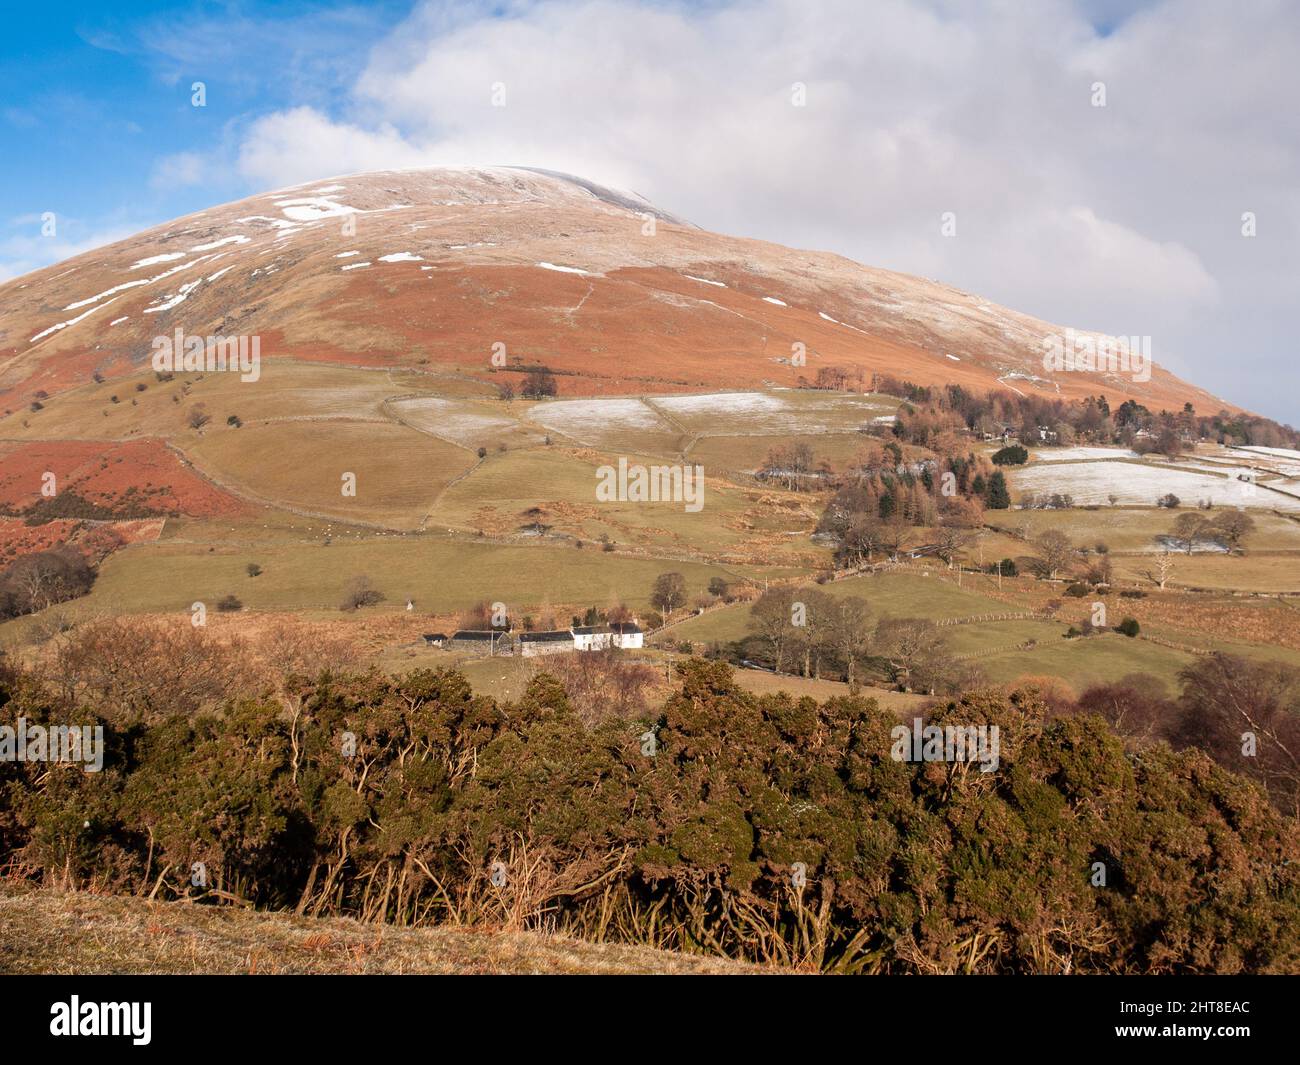 A dusting of snow lies on Blencathra mountain during winter in England's Lake District. Stock Photo